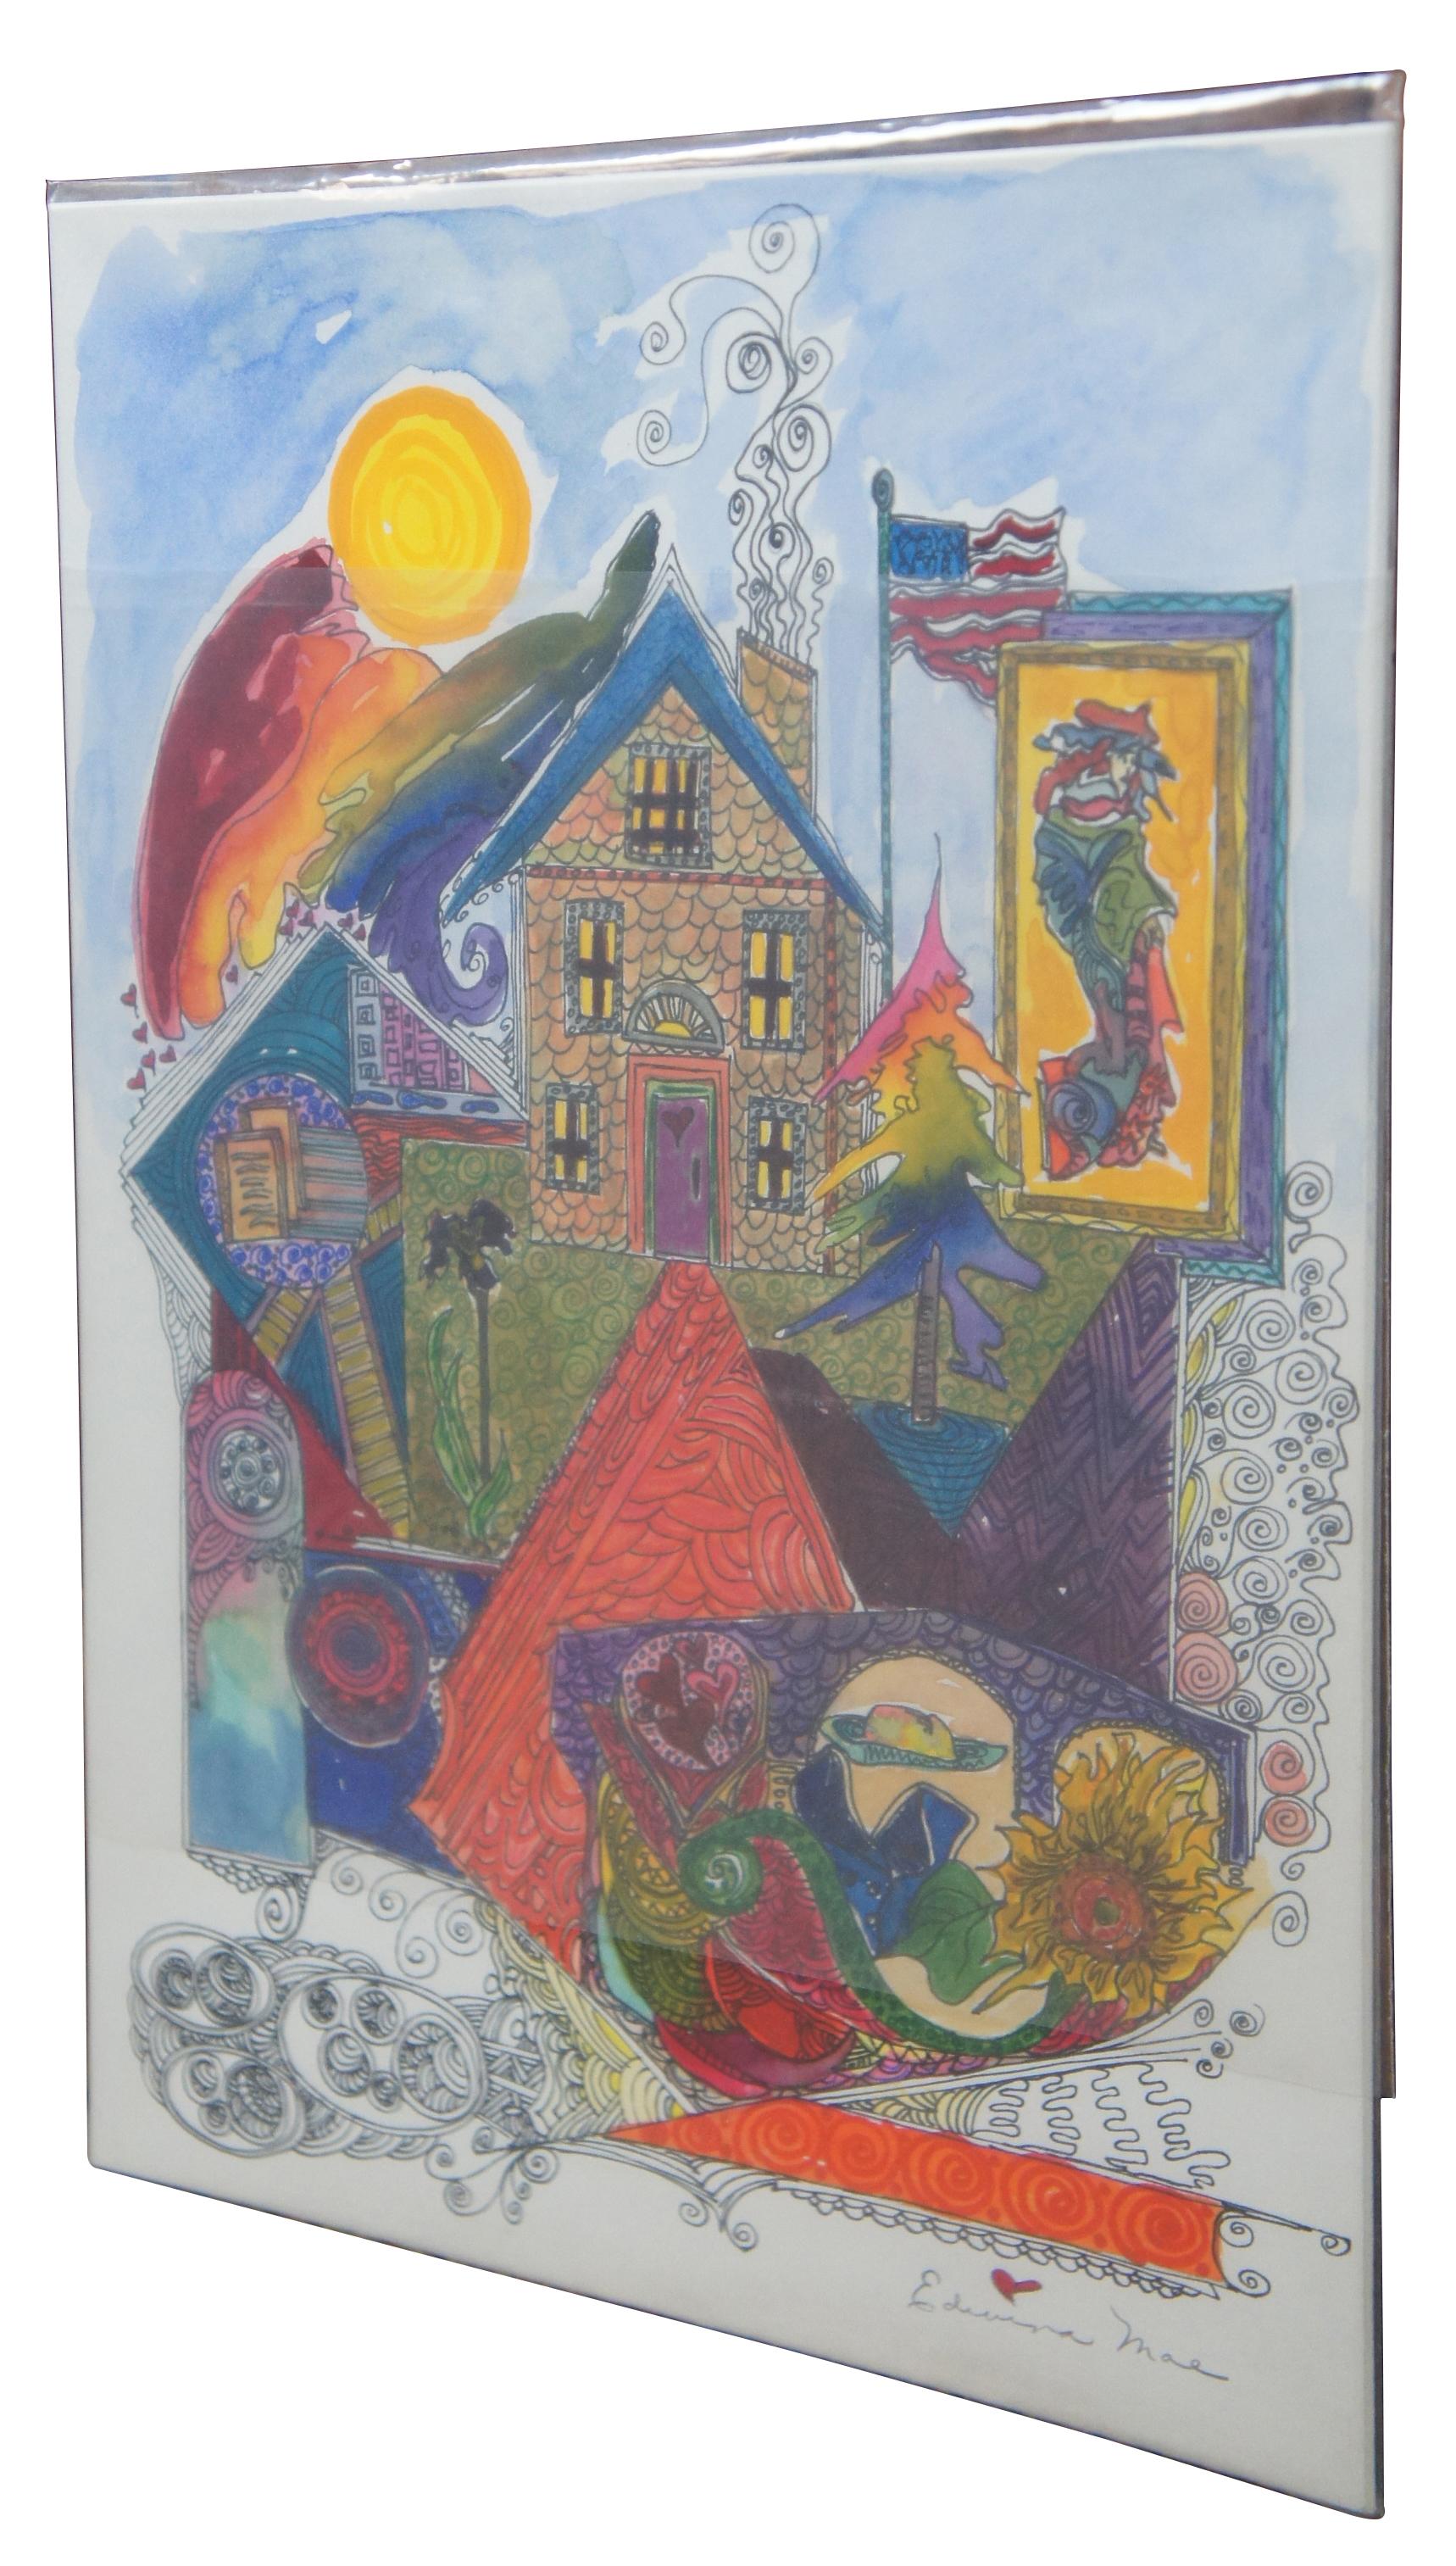 Edwina Mae Eldridge, 1996 watercolor painting featuring a house, rainbows, American flag, work of art and other assorted symbols the artist related to the Shifflers. / Edwina Mae Eldridge (